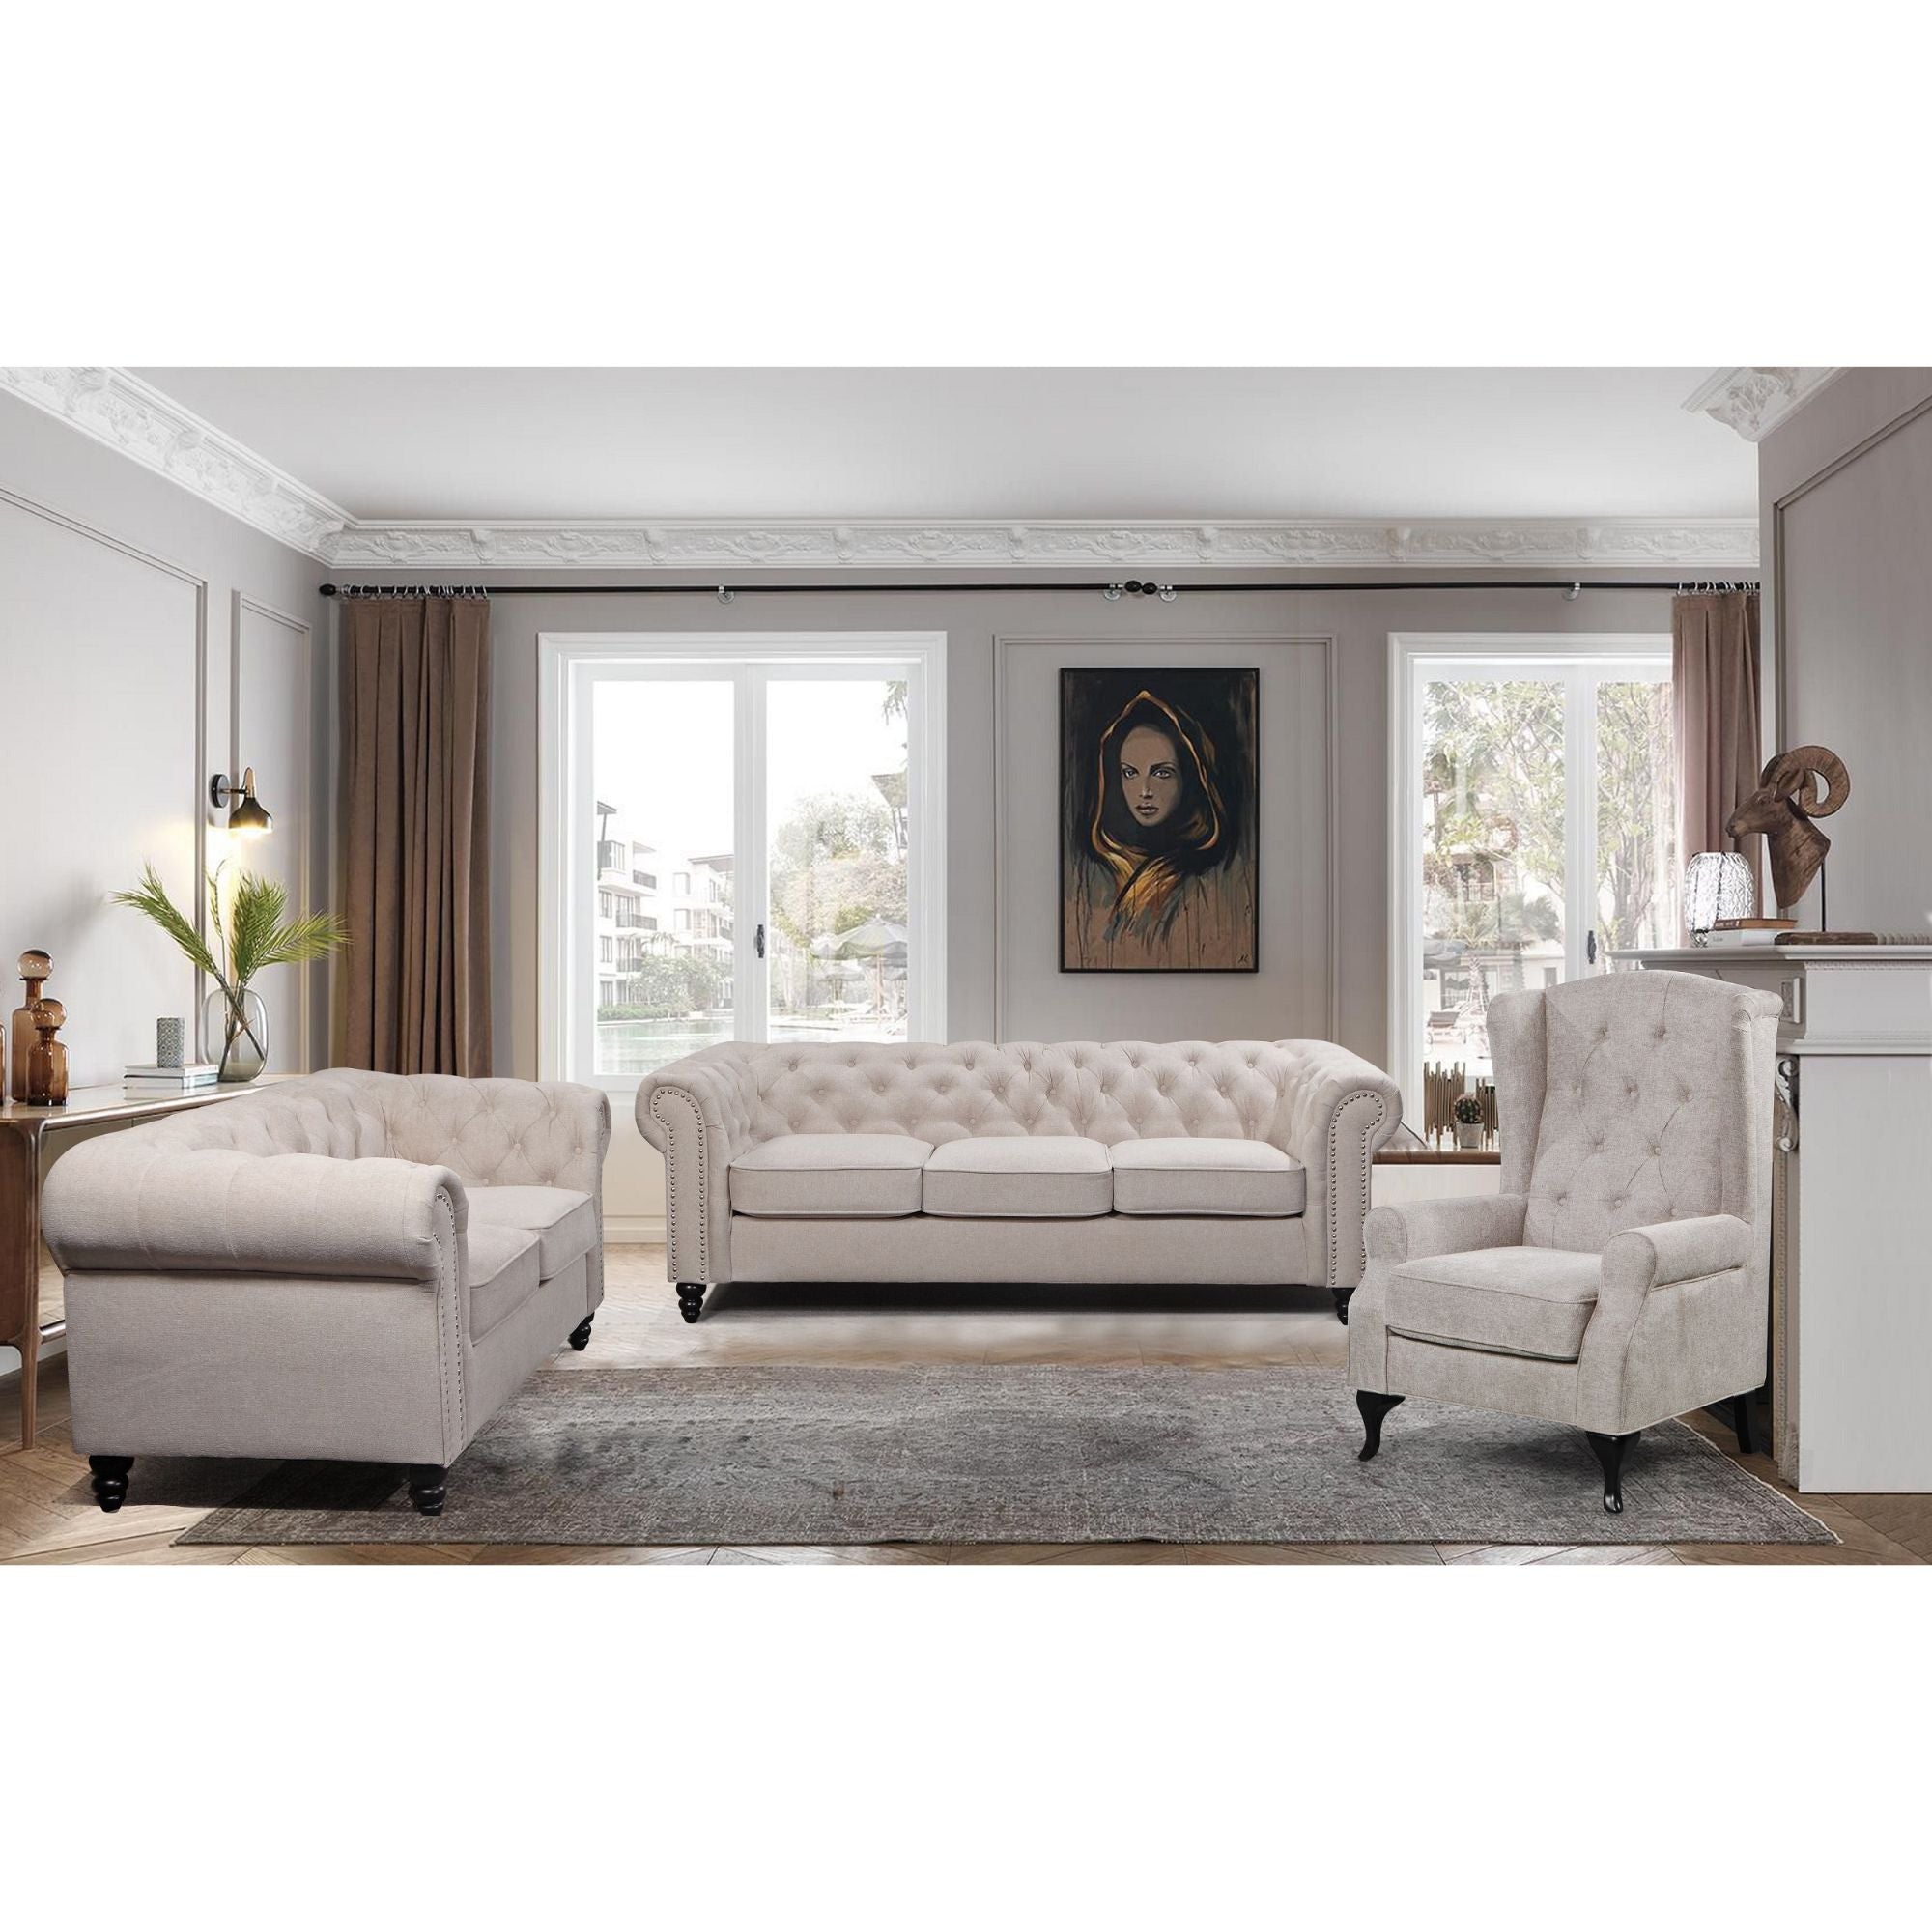 Mellowly 3 Seater Sofa Fabric Uplholstered Chesterfield Lounge Couch - Beige - 0